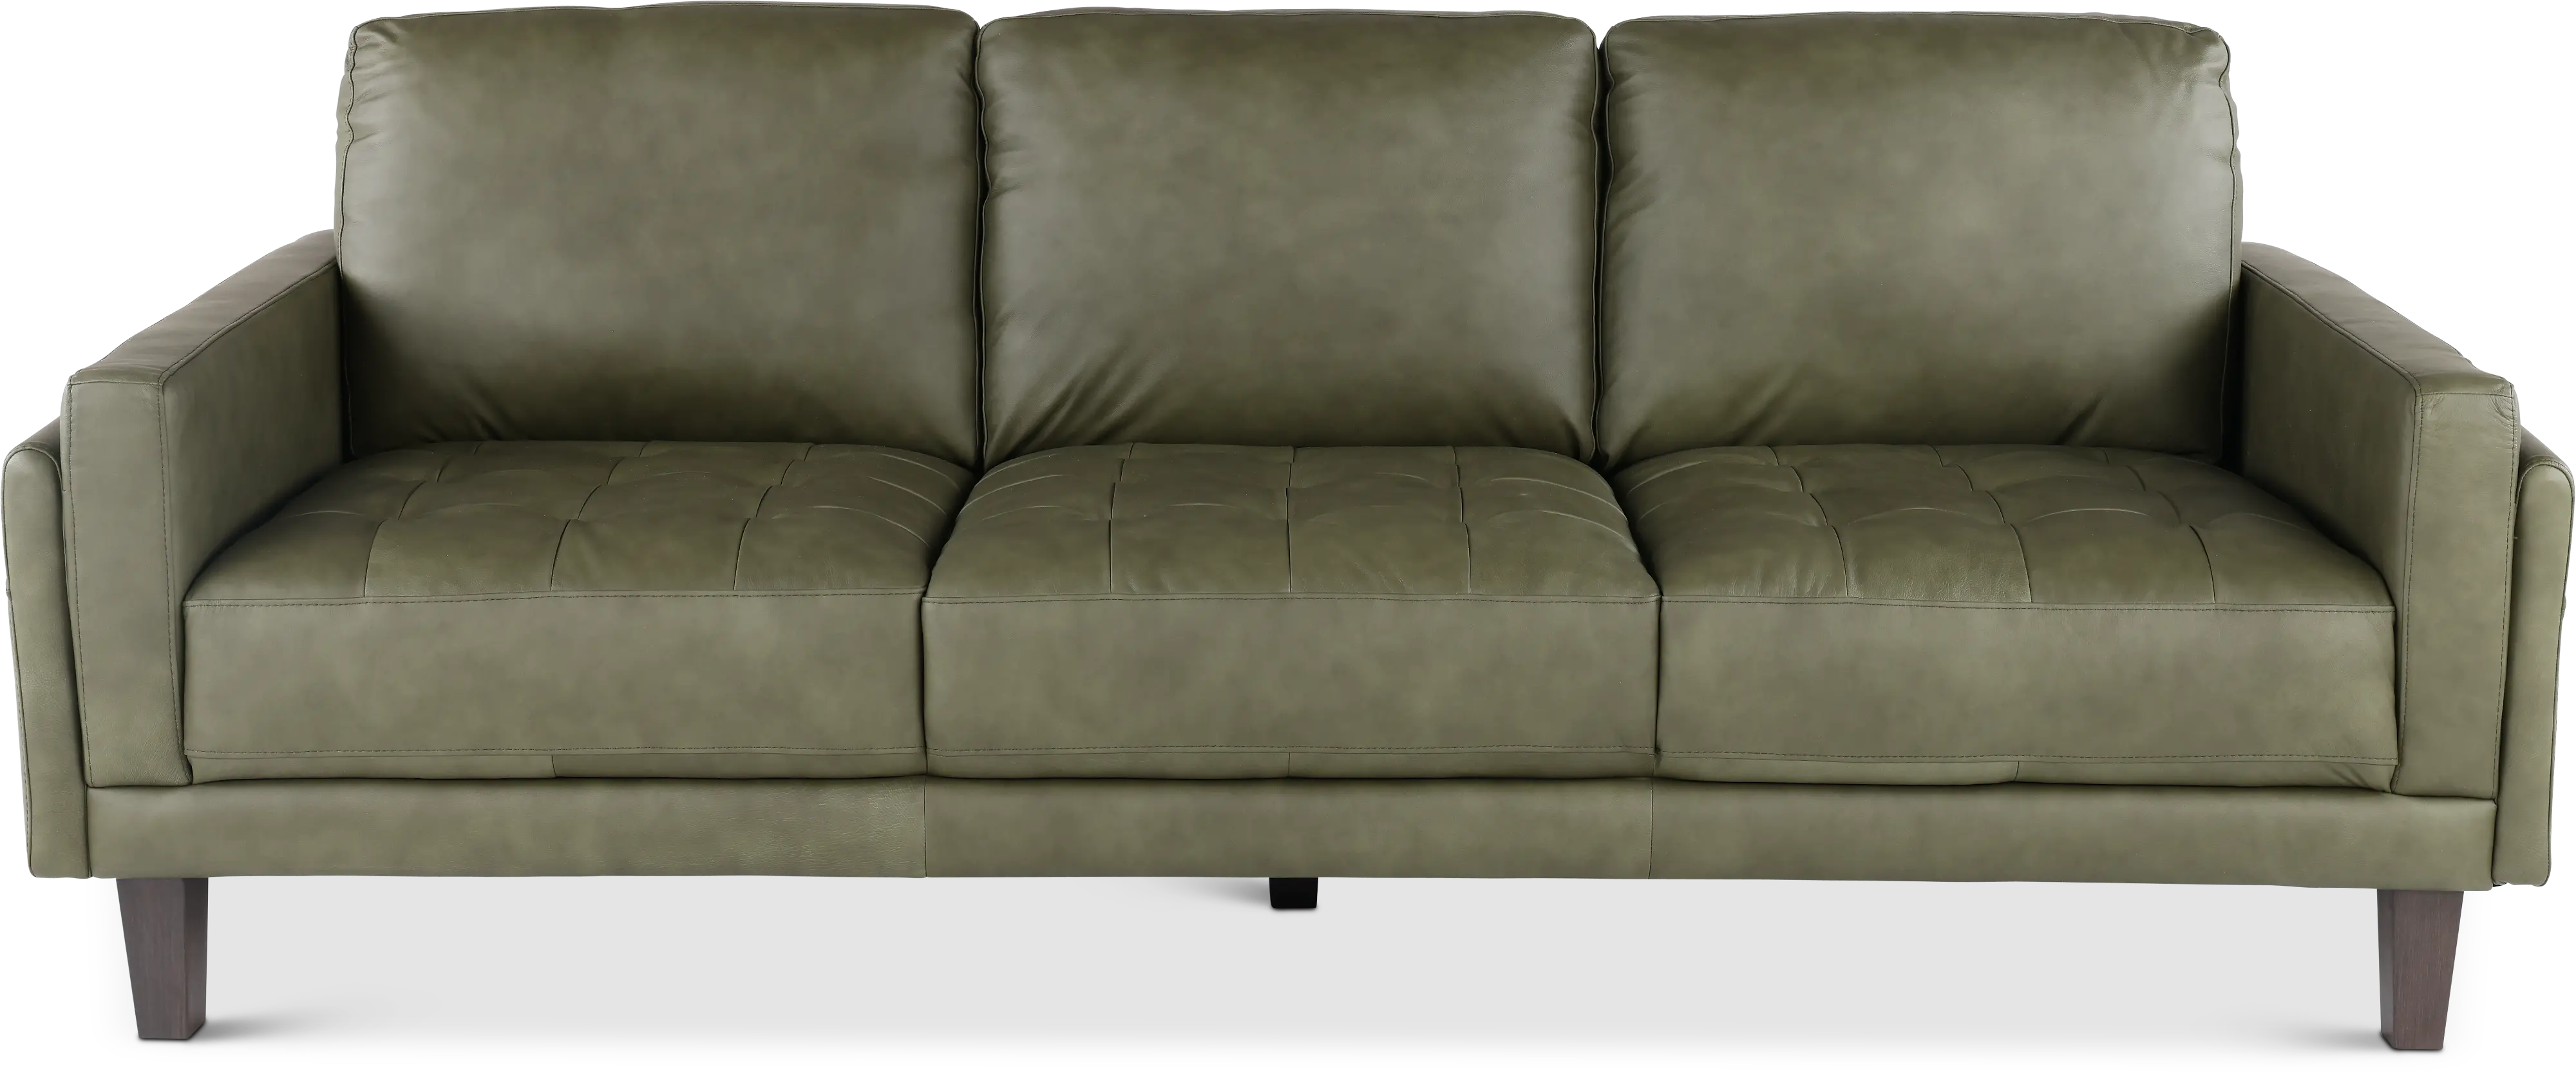 Guernsey Green Leather Sofa